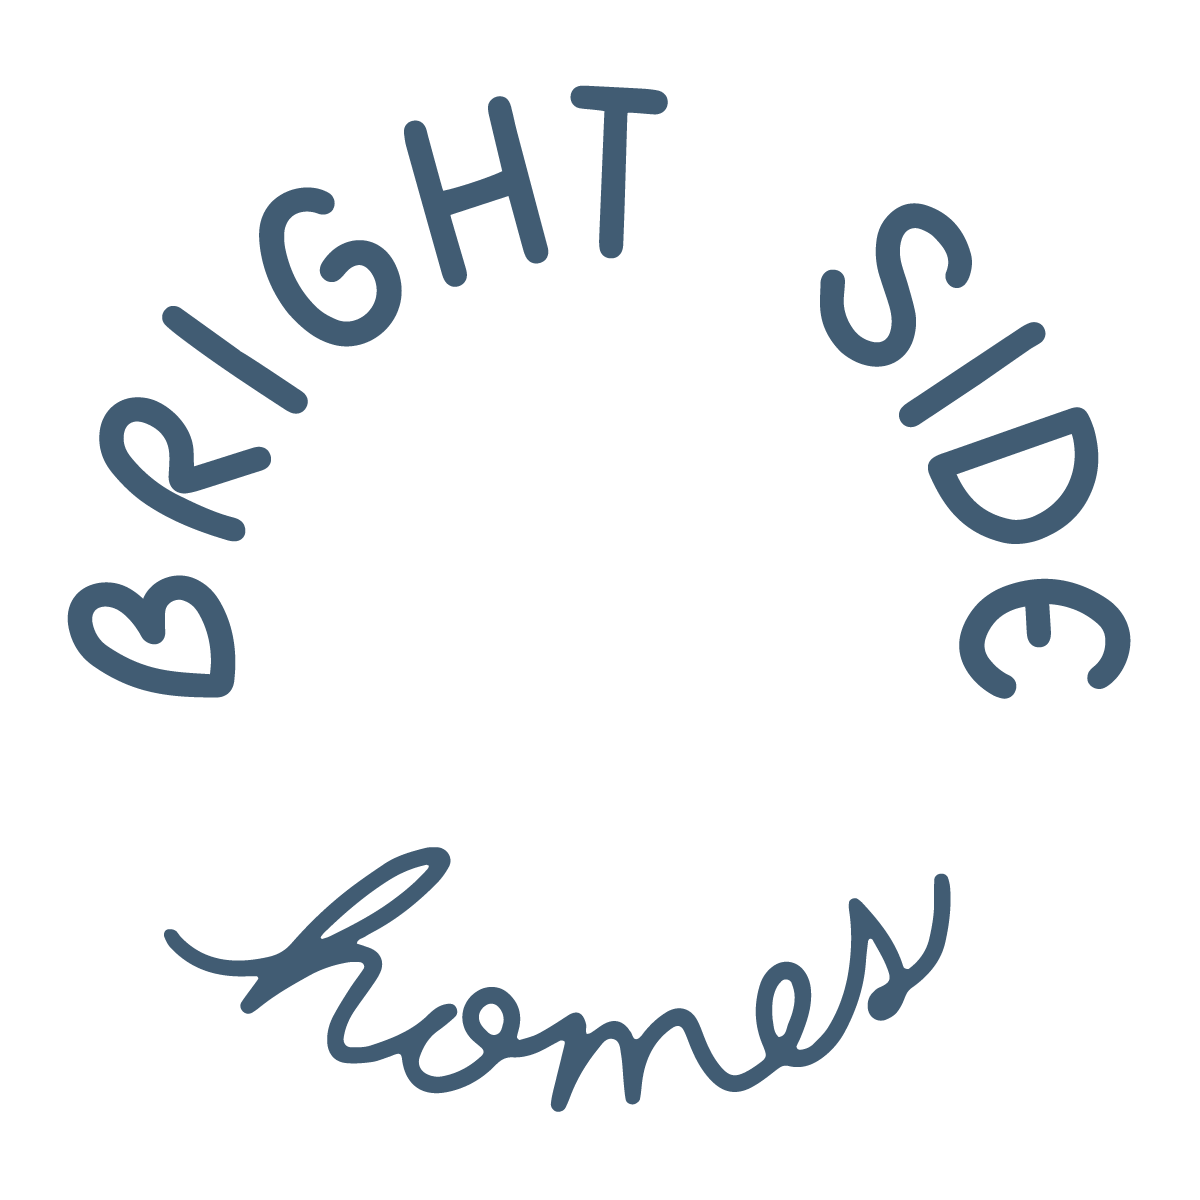 Sell to Bright Side logo